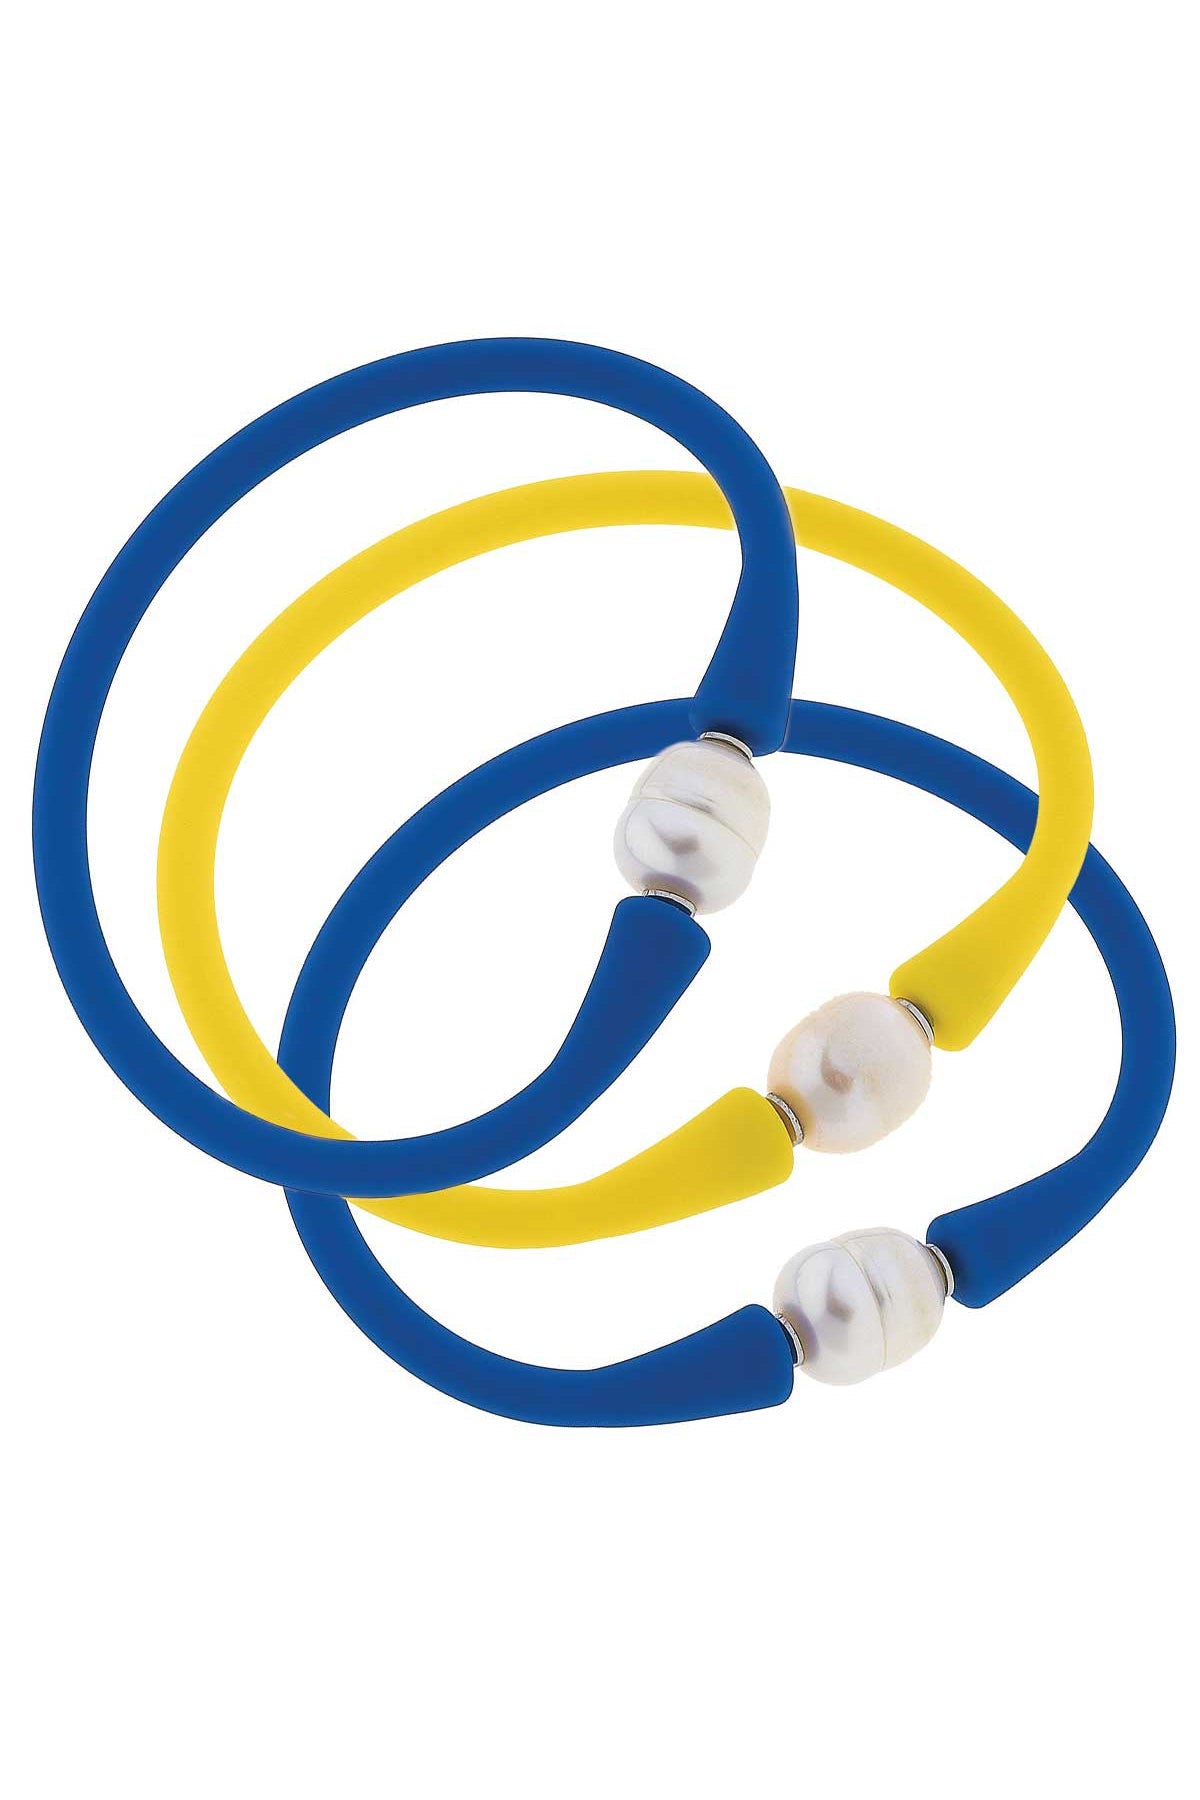 Bali Game Day Bracelet Set of 3 in Blue & Yellow